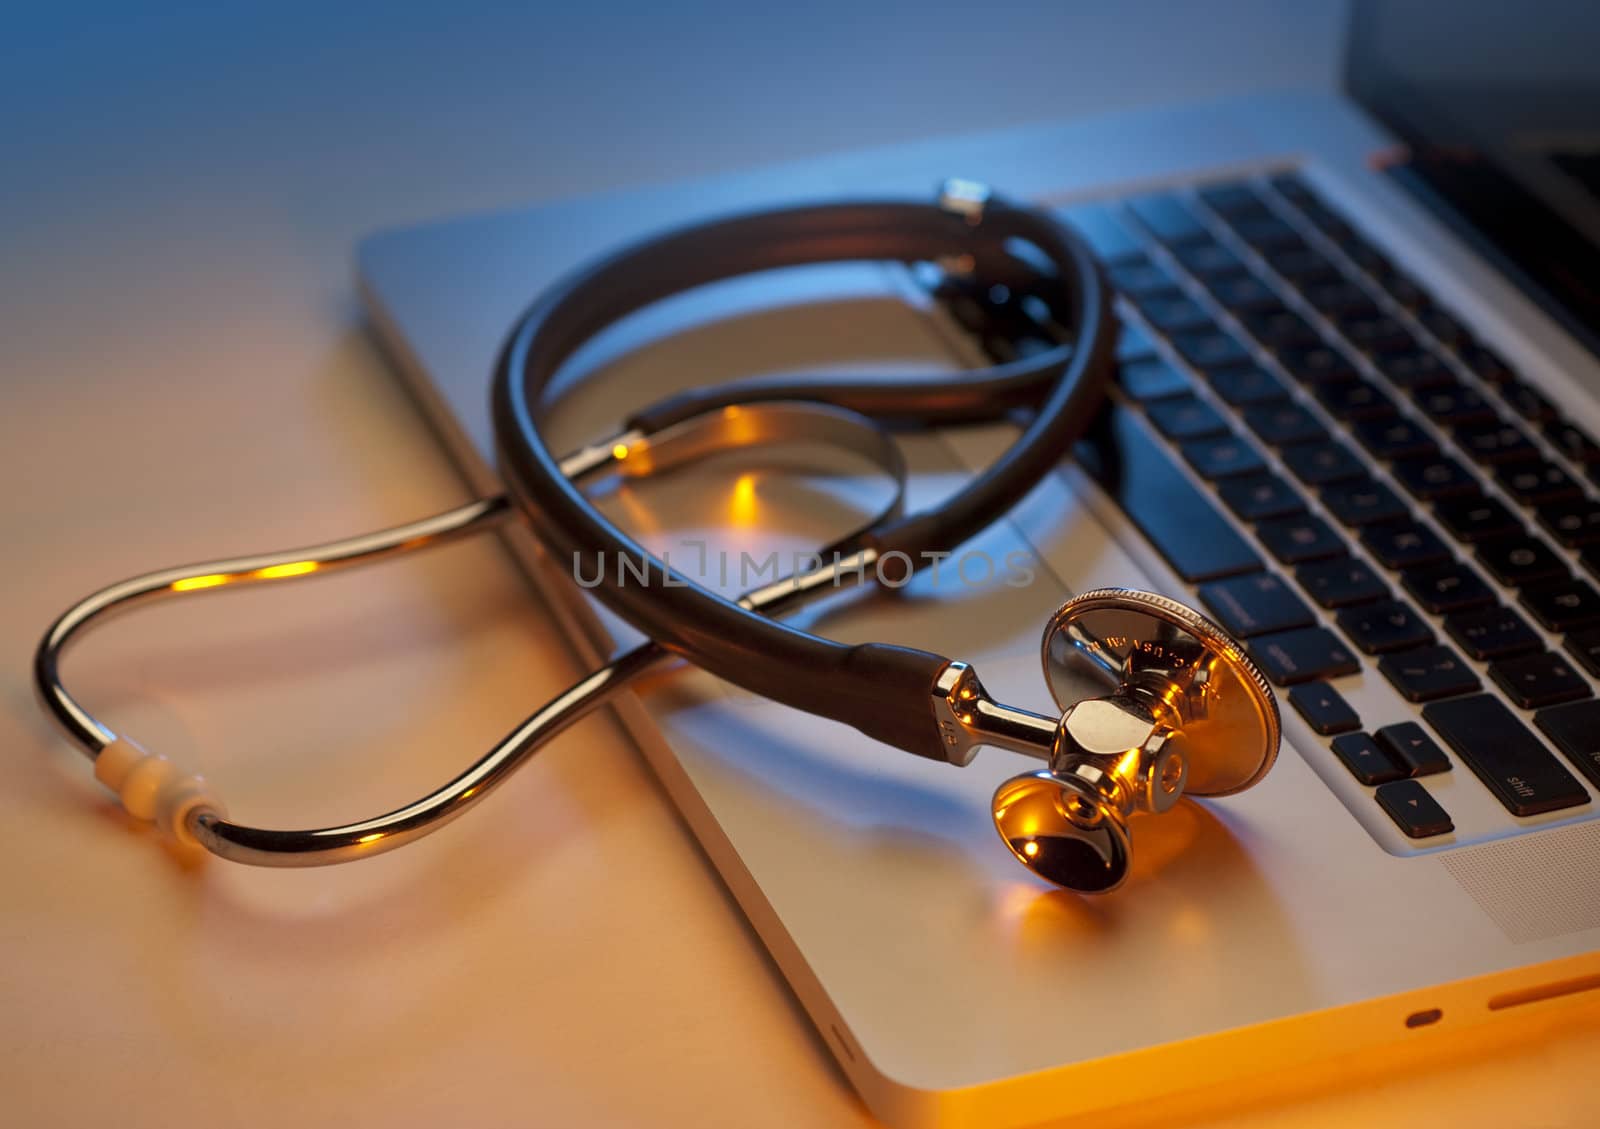 Stethoscope on a laptop computer by f/2sumicron